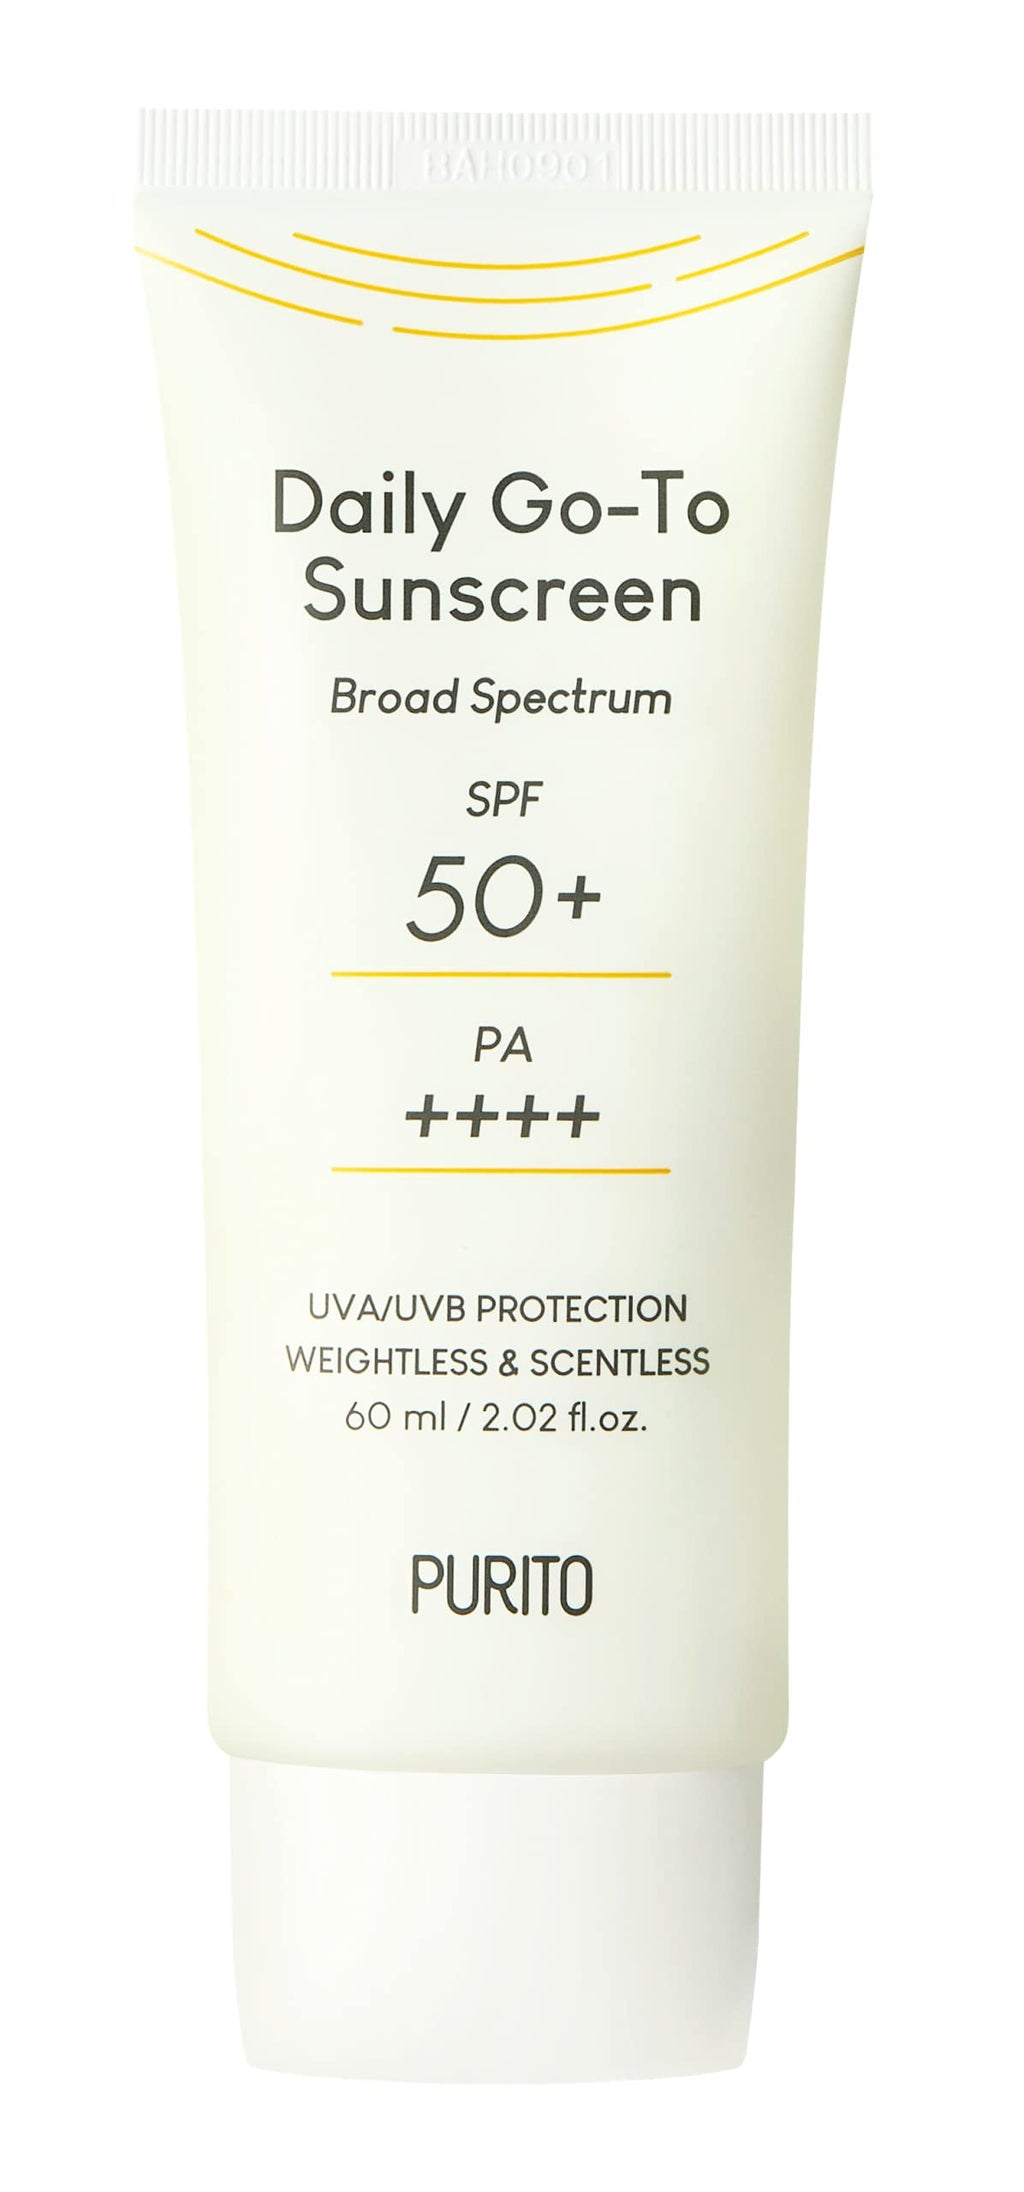 [Australia] - PURITO Daily Go-To Sunscreen 60ml / 2.02 fl.oz. SPF 50+ PA ++++ safe ingredients, UVA/UVB protection, broad-spectrum, calm, soothing 